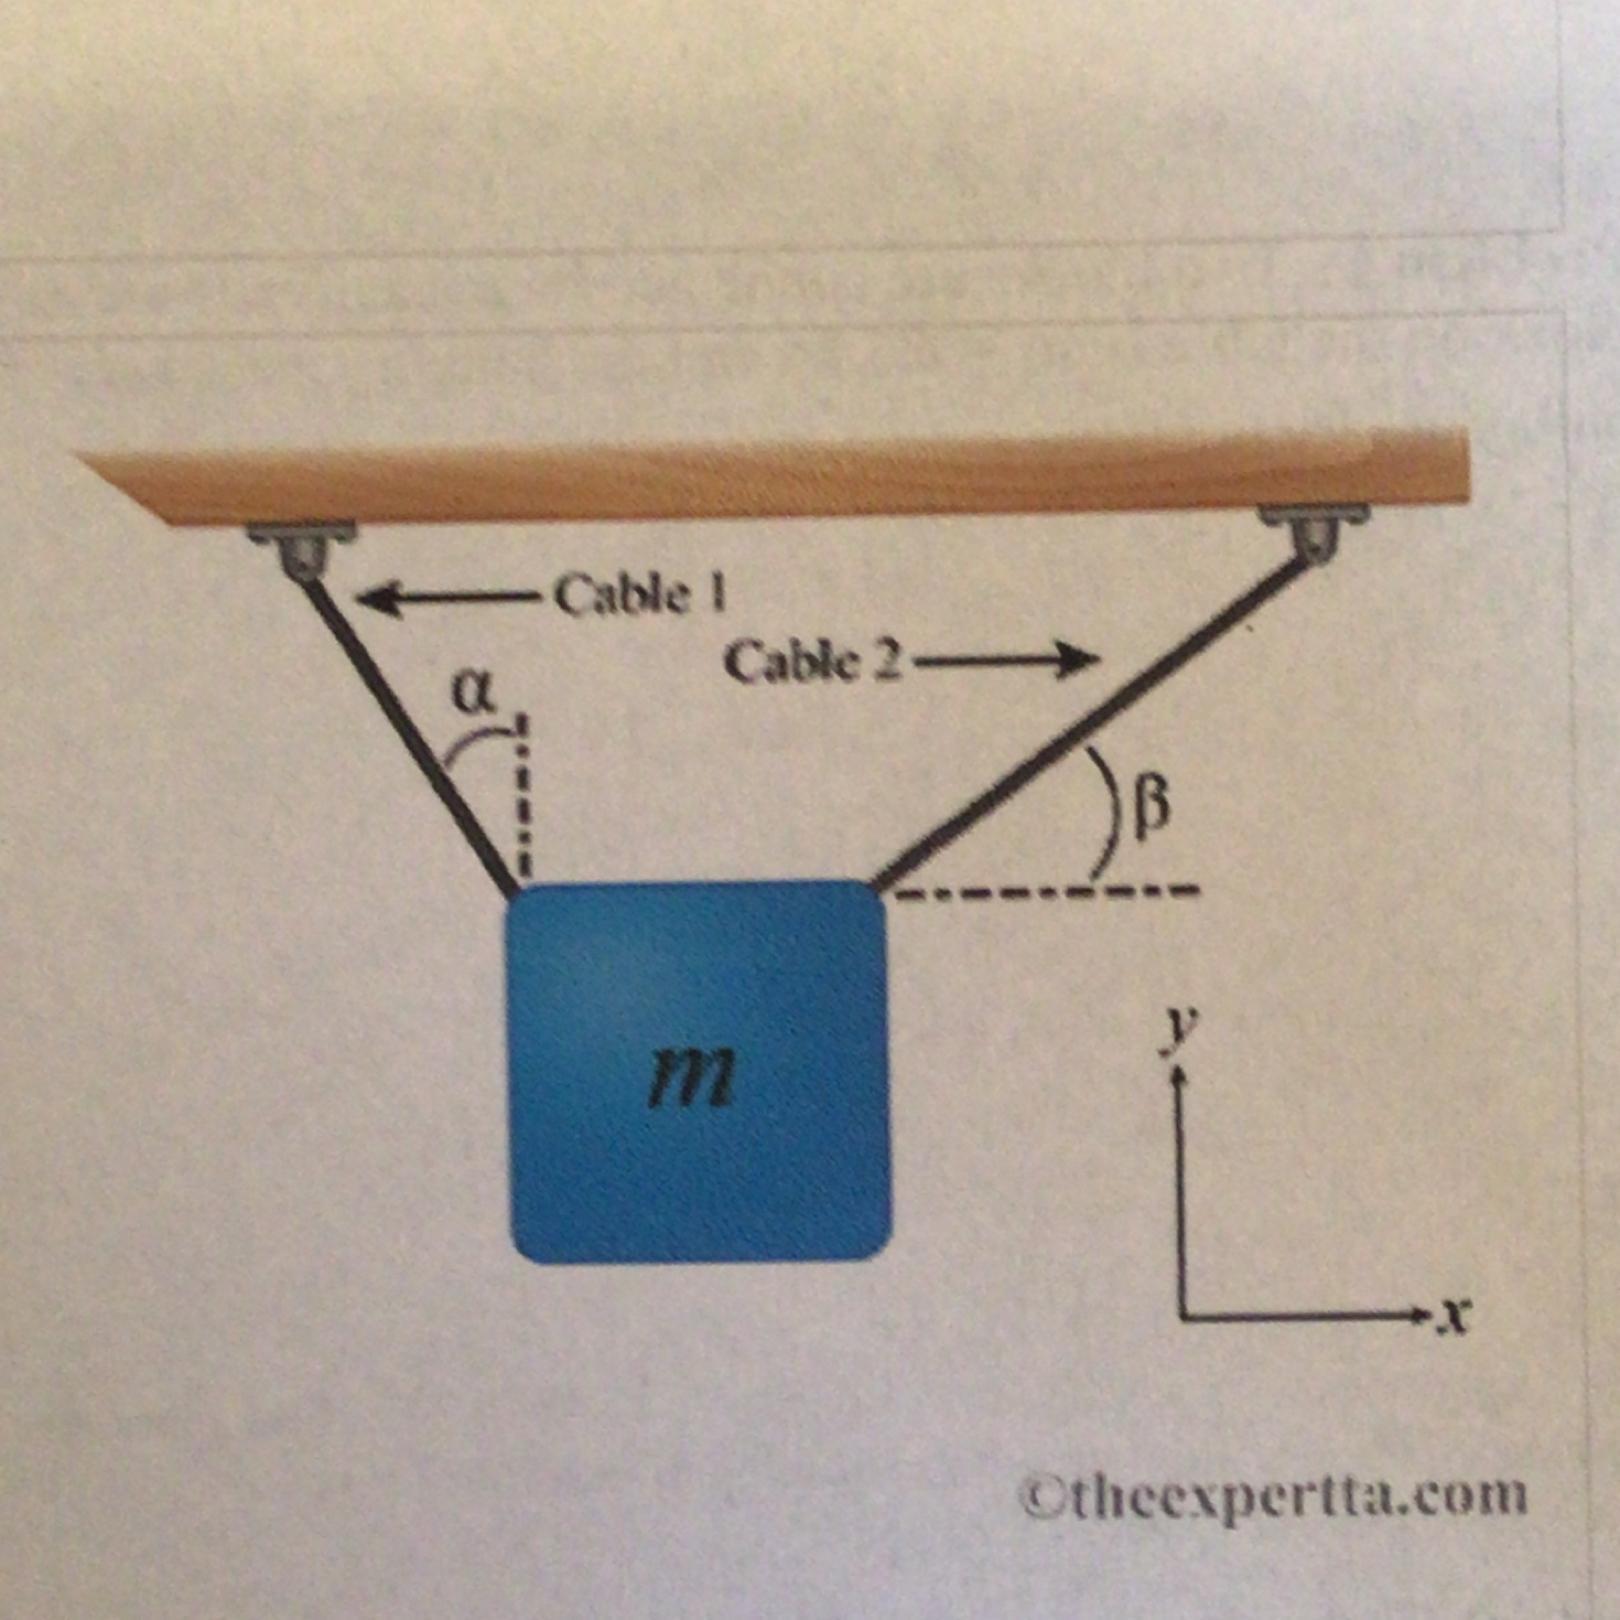 A Block Having A Mass Of M = 19.5 Kg Is Suspended Via Two Cables As Shown In The Figure. The Angles Shown